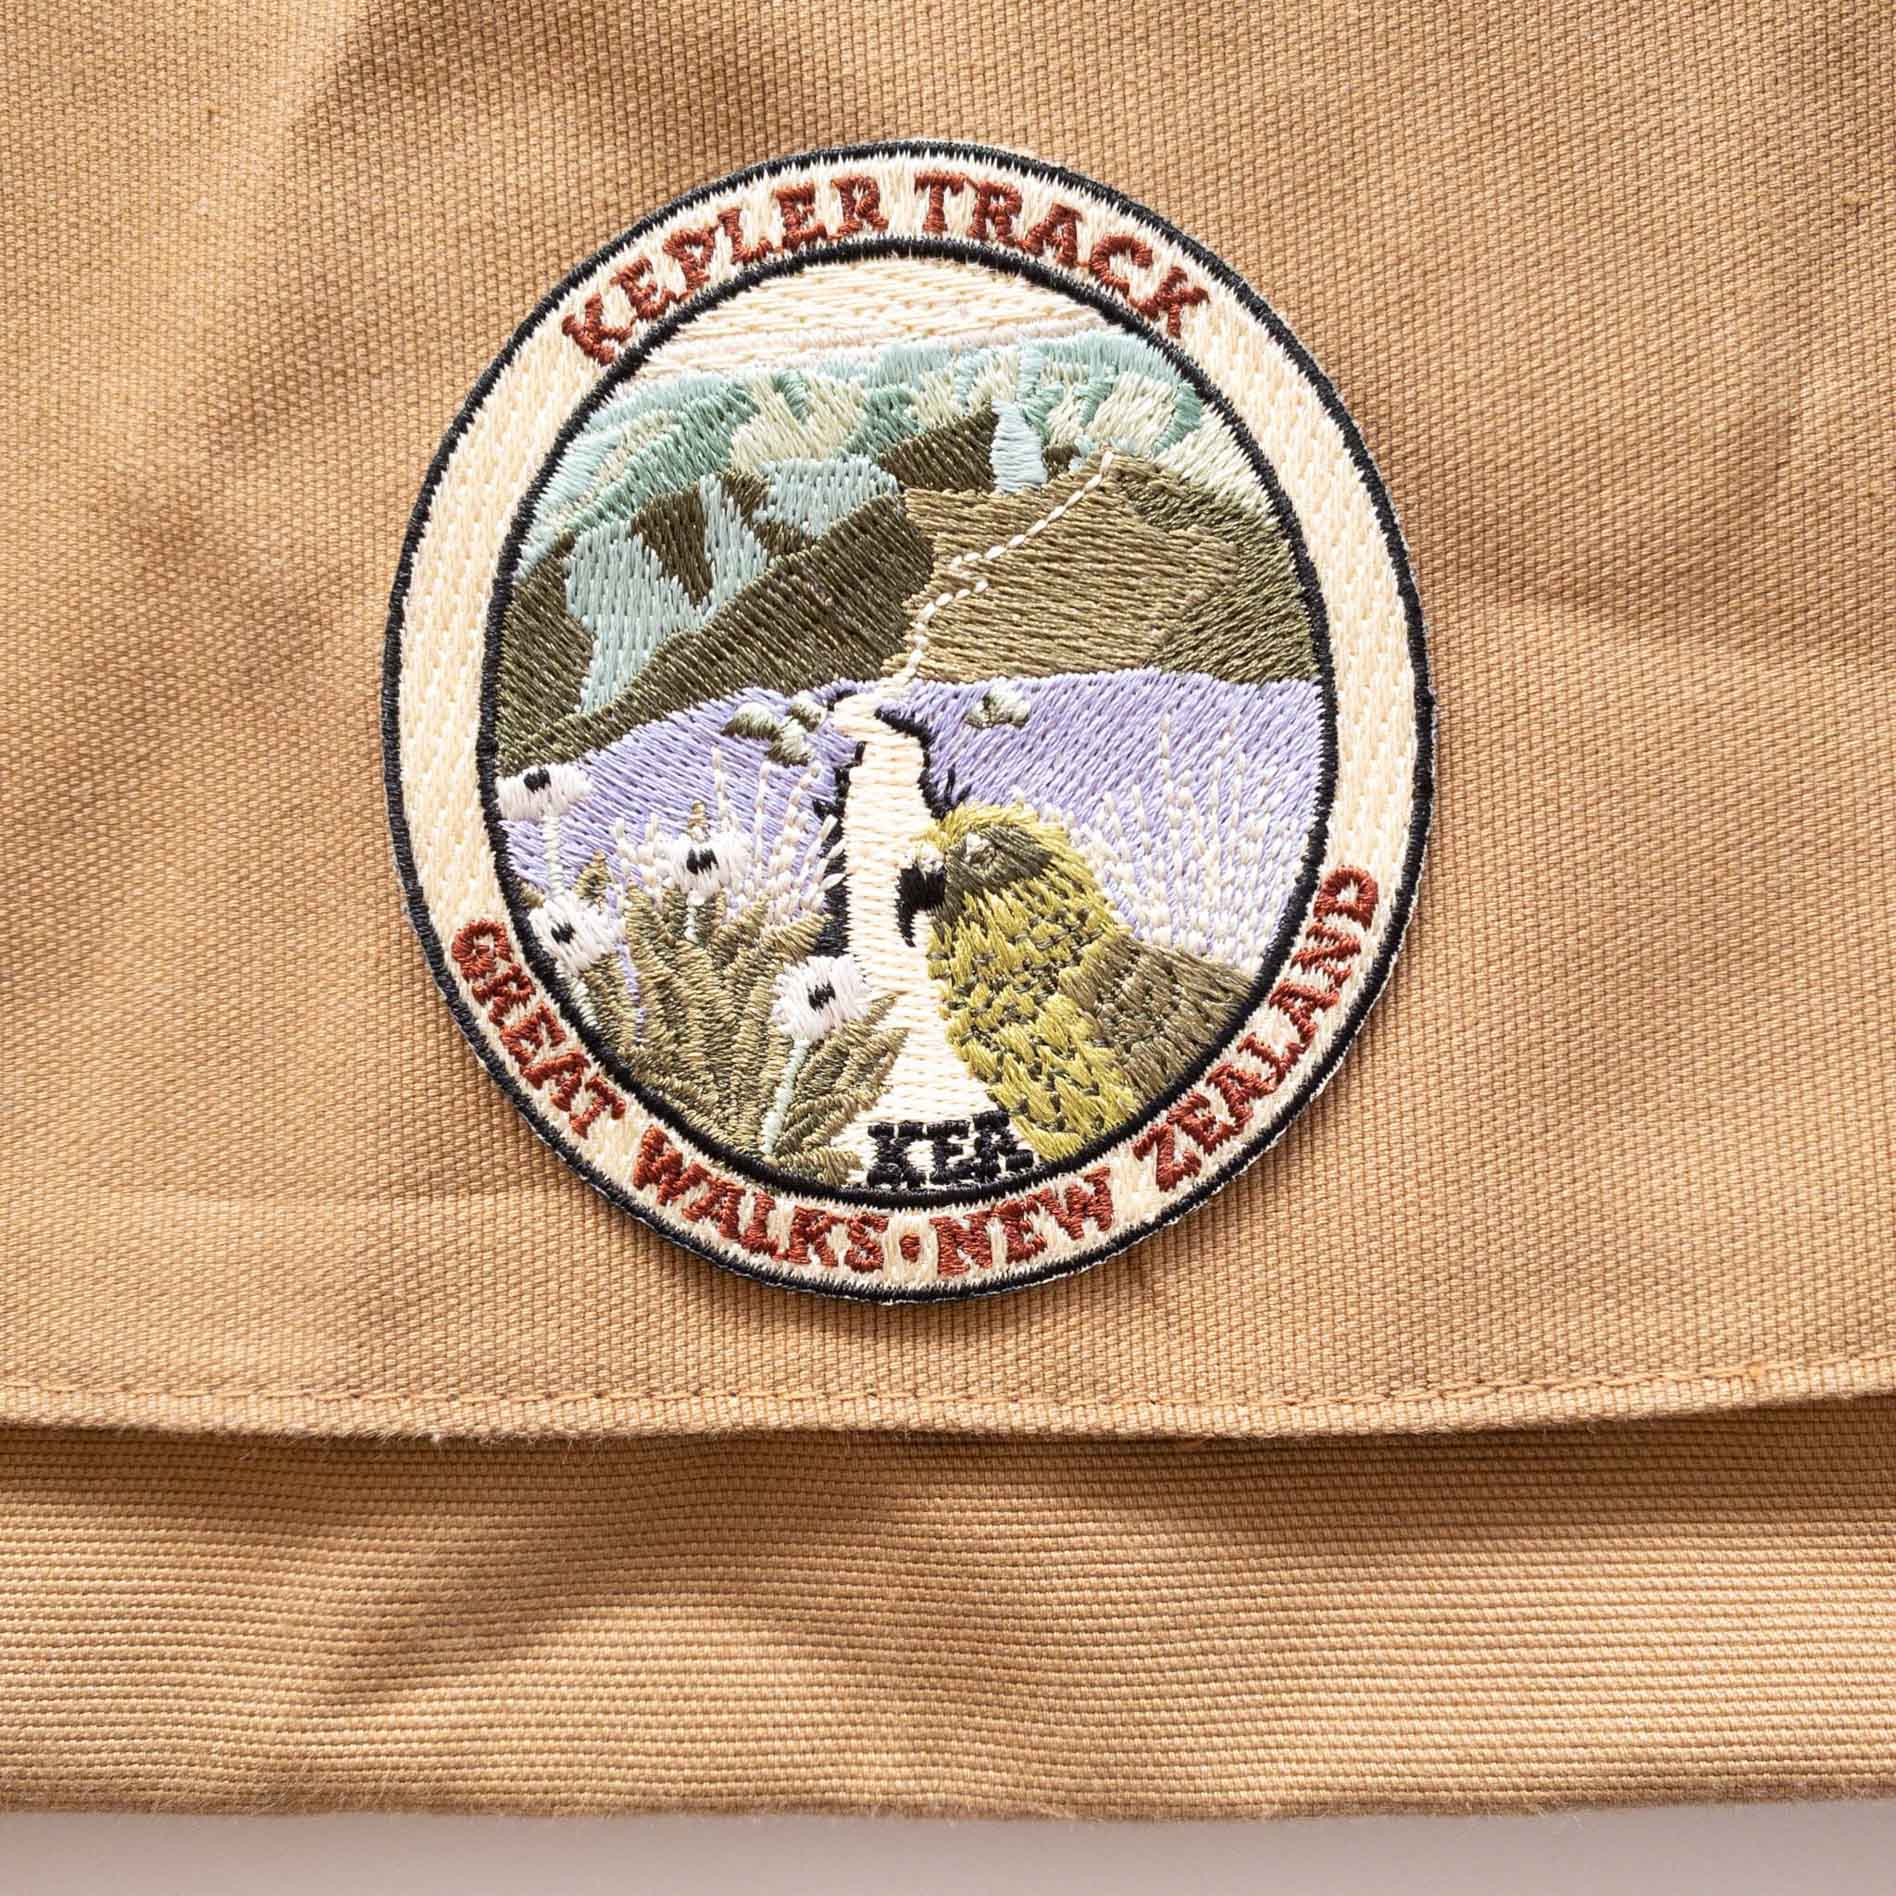 Oval, embroidered Kepler Track patch, with a kea, mountain daisy and alpine ridges, on a brown canvas bag..